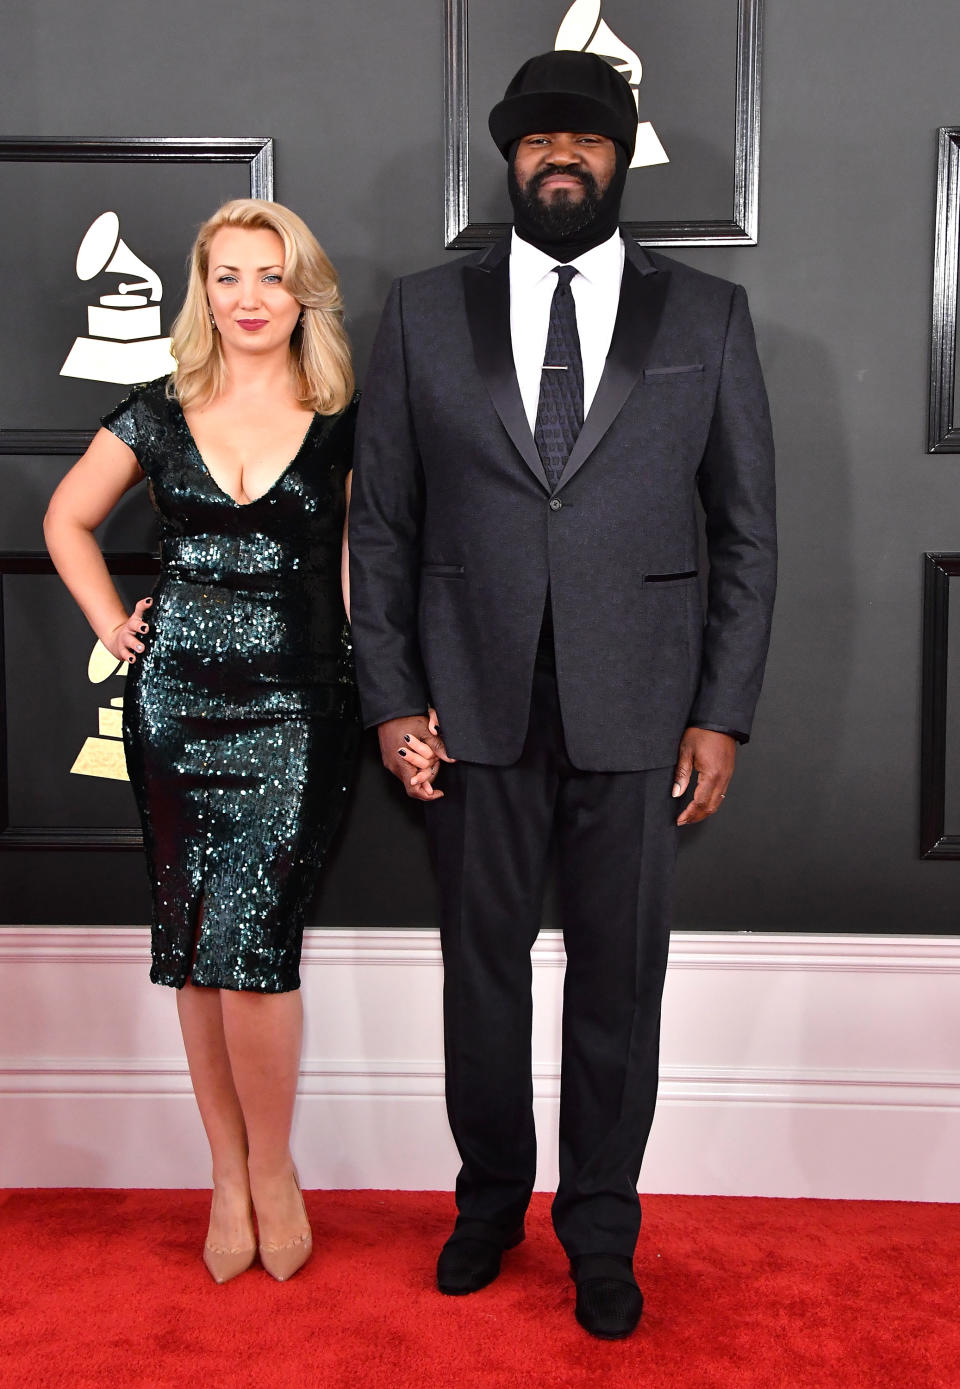 LOS ANGELES, CA - FEBRUARY 12:  Victoria Porter (L) and singer Gregory Porter attend The 59th GRAMMY Awards at STAPLES Center on February 12, 2017 in Los Angeles, California.  (Photo by Steve Granitz/WireImage)